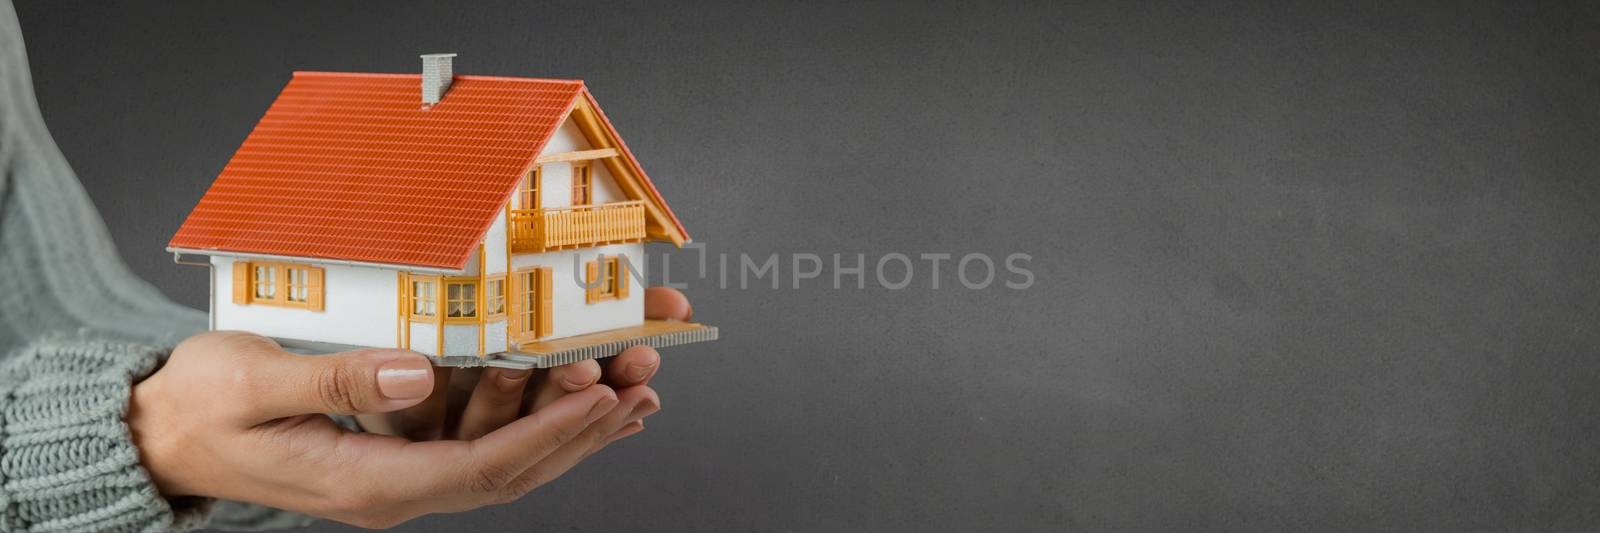 Digital composite of Woman holding a house against grey background as concept of insurance